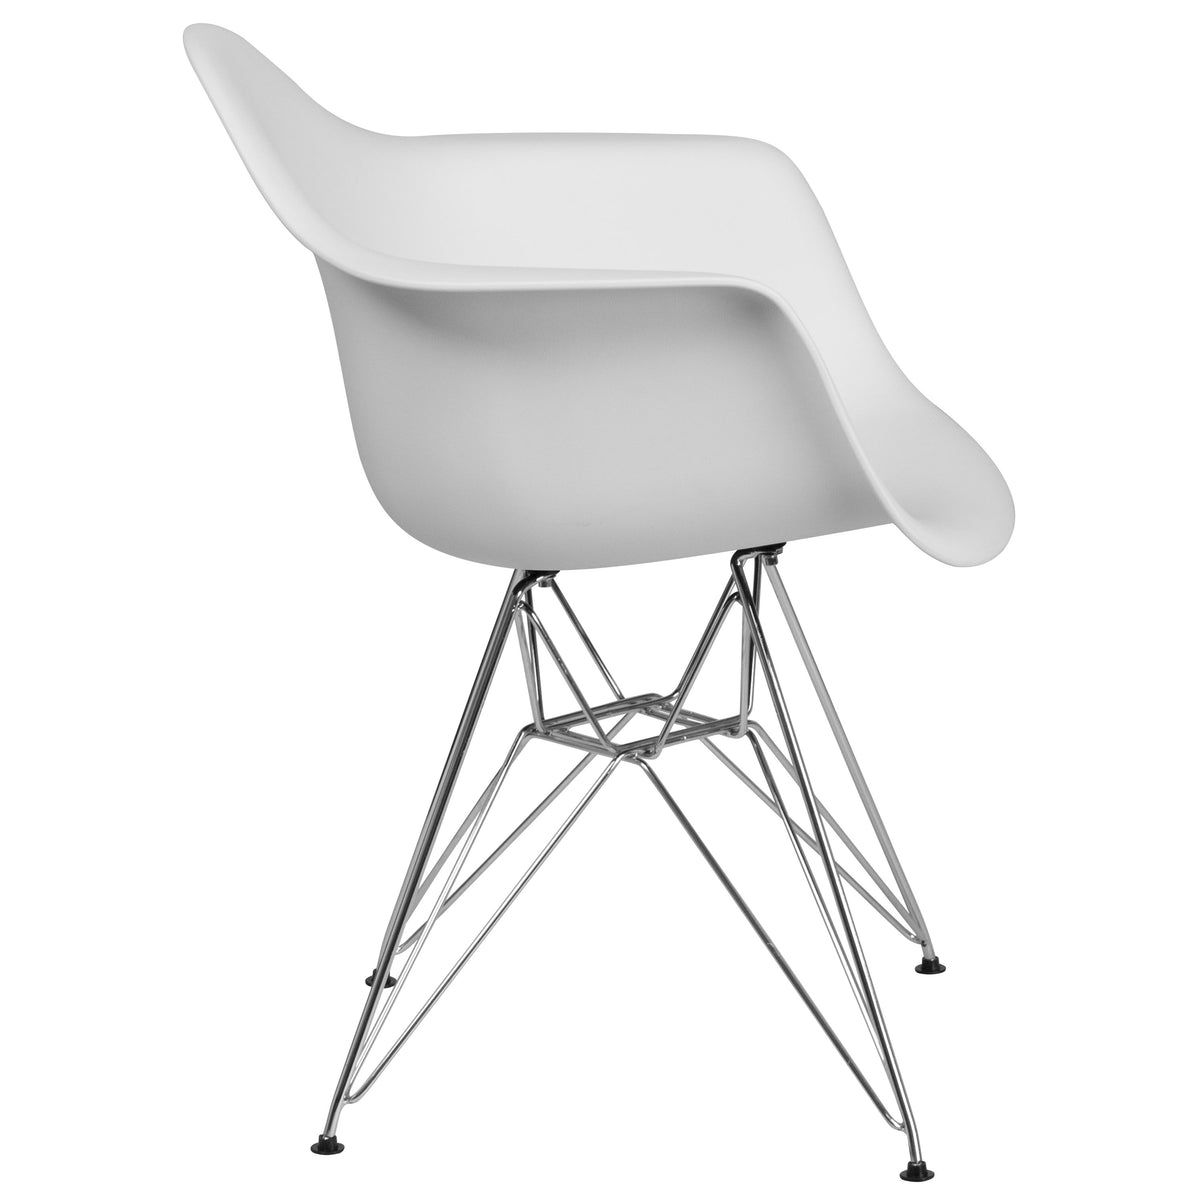 White |#| White Plastic Chair with Arms and Chrome Base - Accent & Side Chair